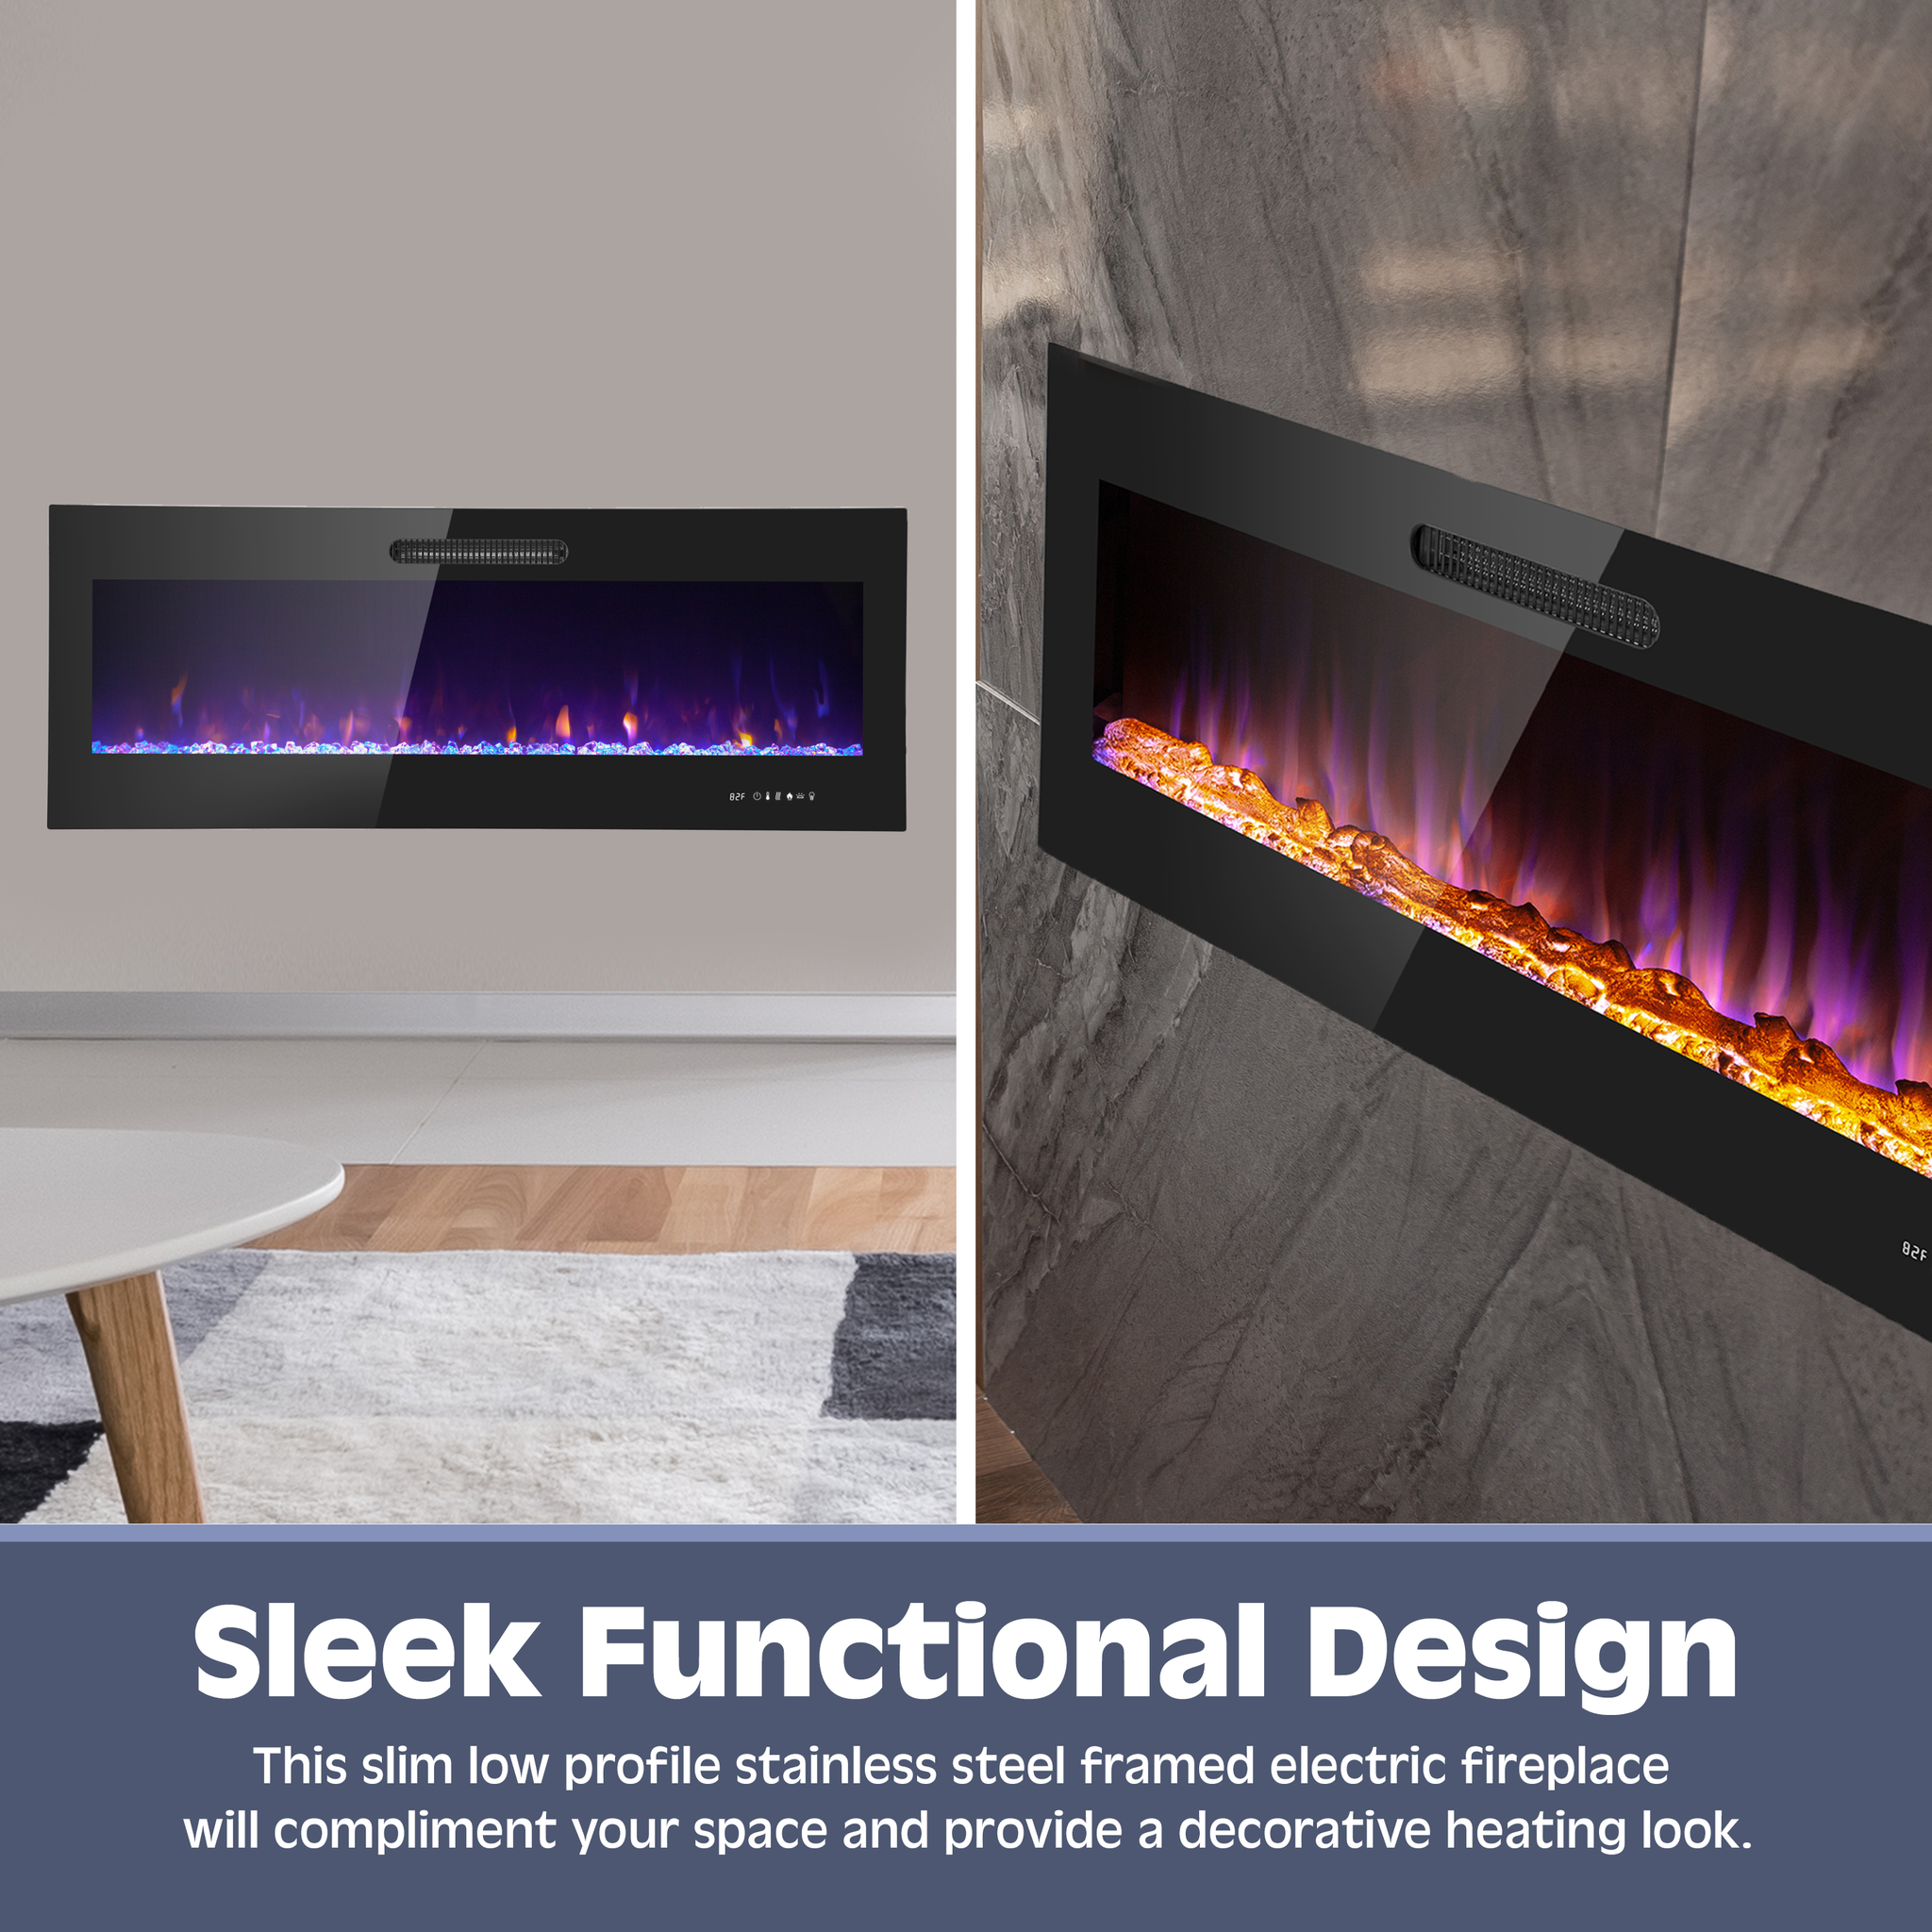 60 Inch LED Slim Design Electric Fireplace Insert and Wall Mounted Fireplace with 1500 Watt Heater, Log & Crystal Ember Options, Adjustable Realistic Flame and Remote Control by Prominence Home